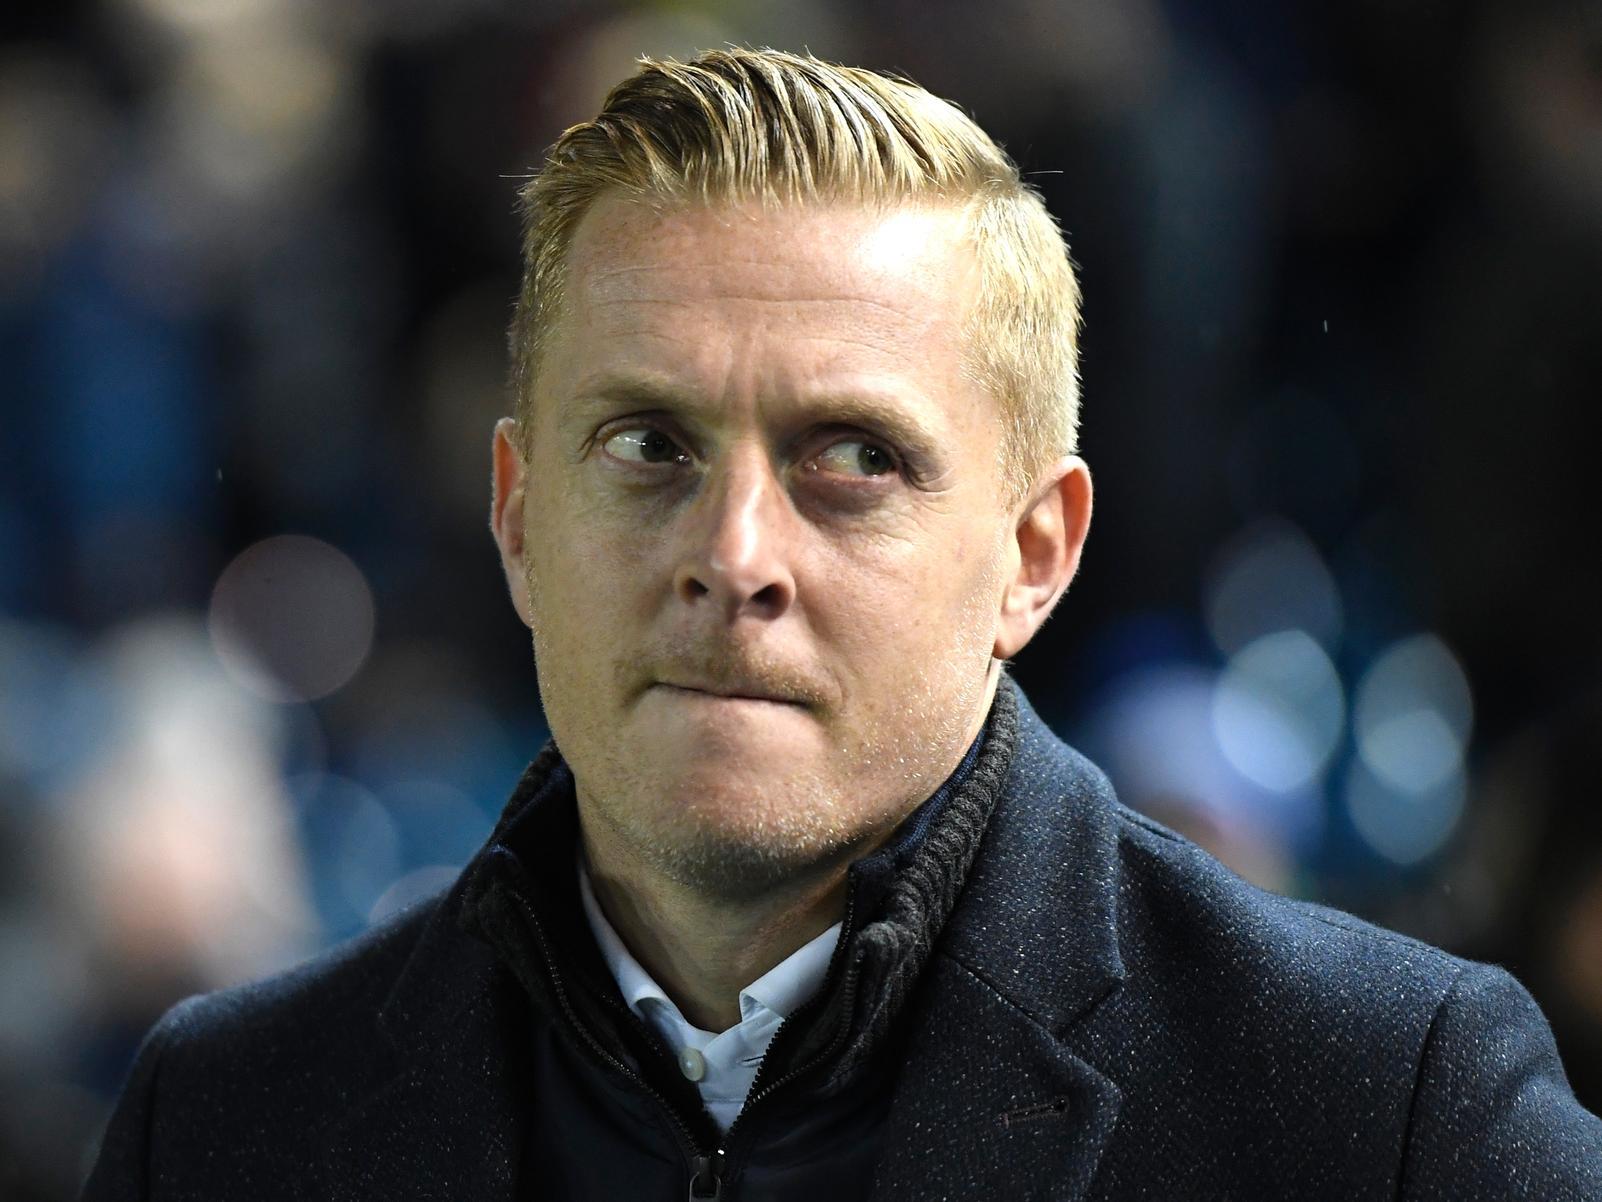 Sheffield Wednesday manager Garry Monk has revealed that he challenged his players to show him "they wanted to win", which spurred them on in a much-needed 3-1 victory against Charlton. (Sheffield Star)